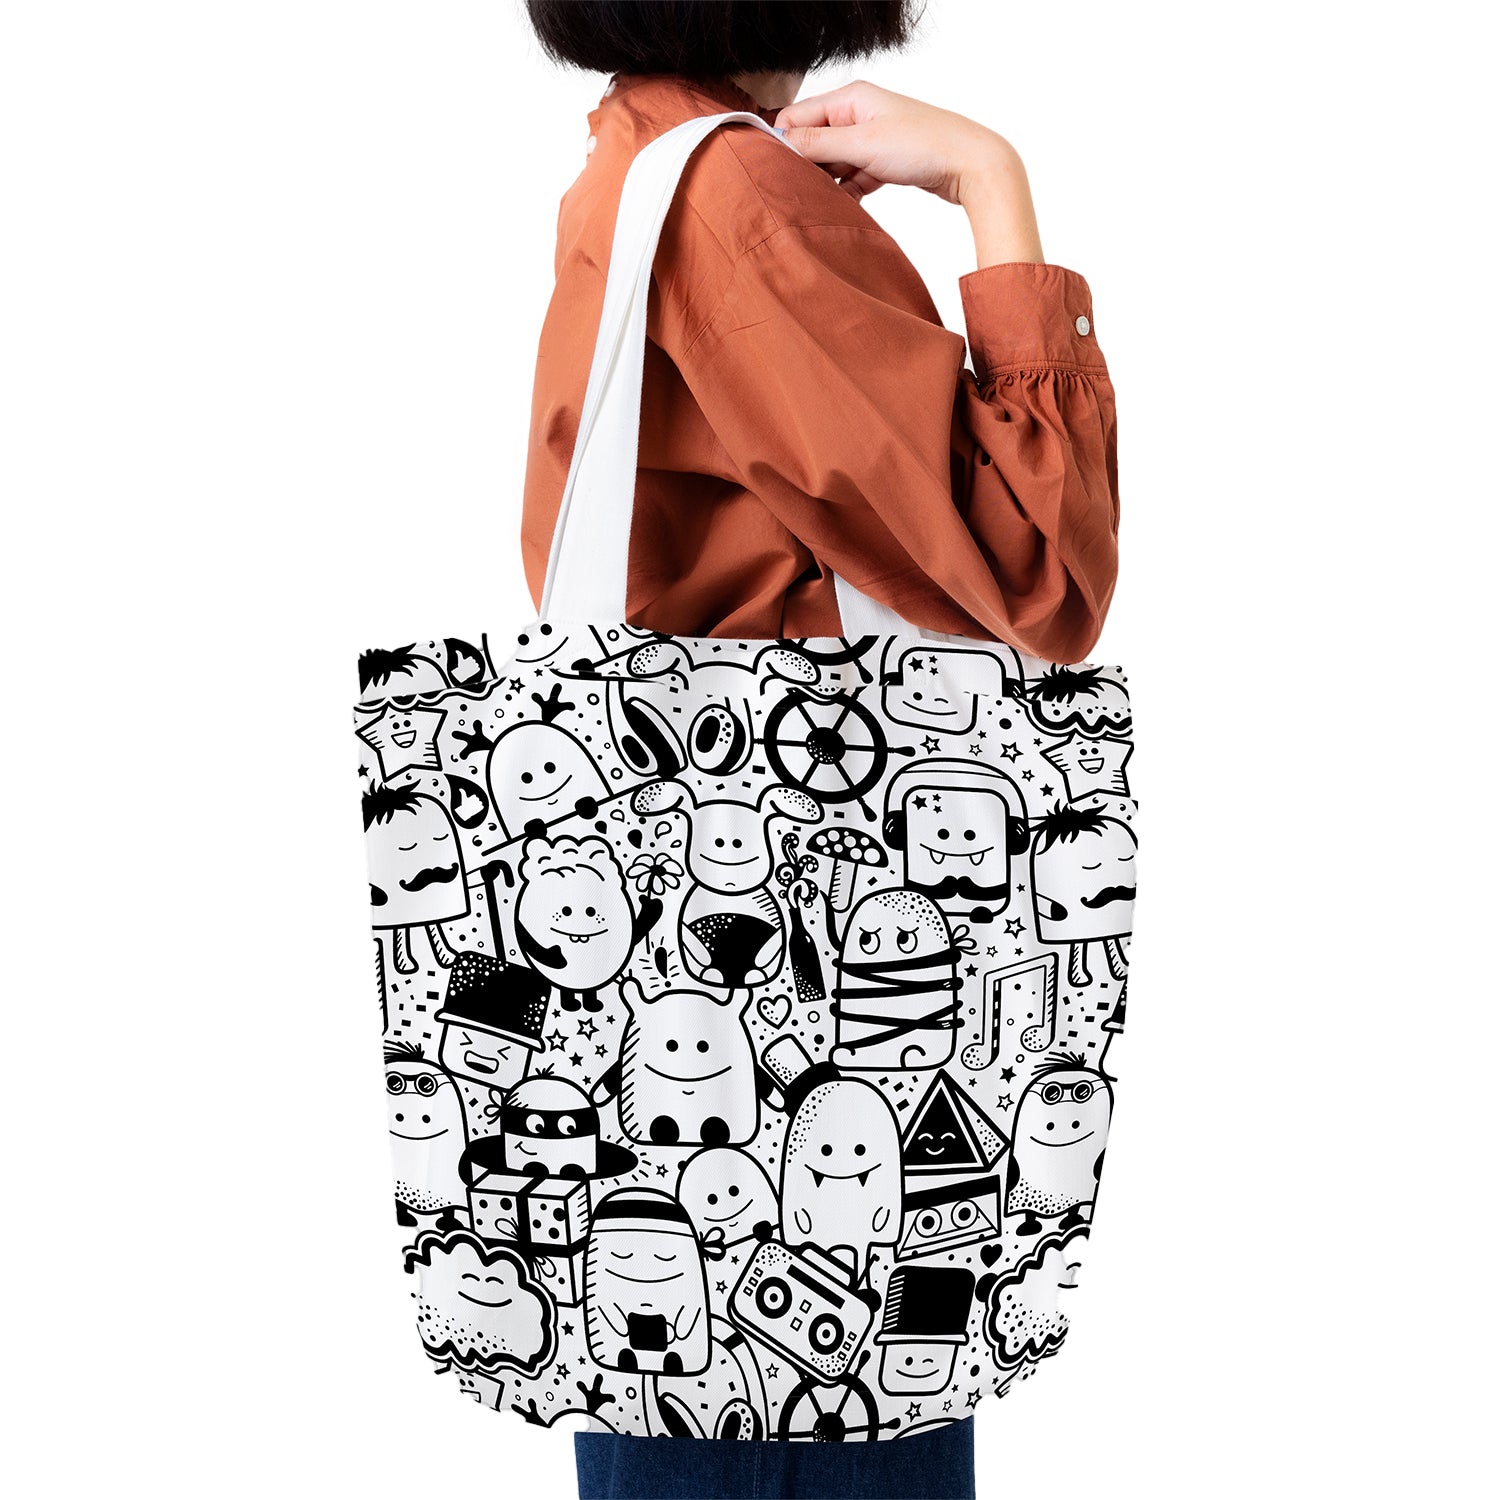 Doodles Women Curved Tote Bag - Multicolor -One Size